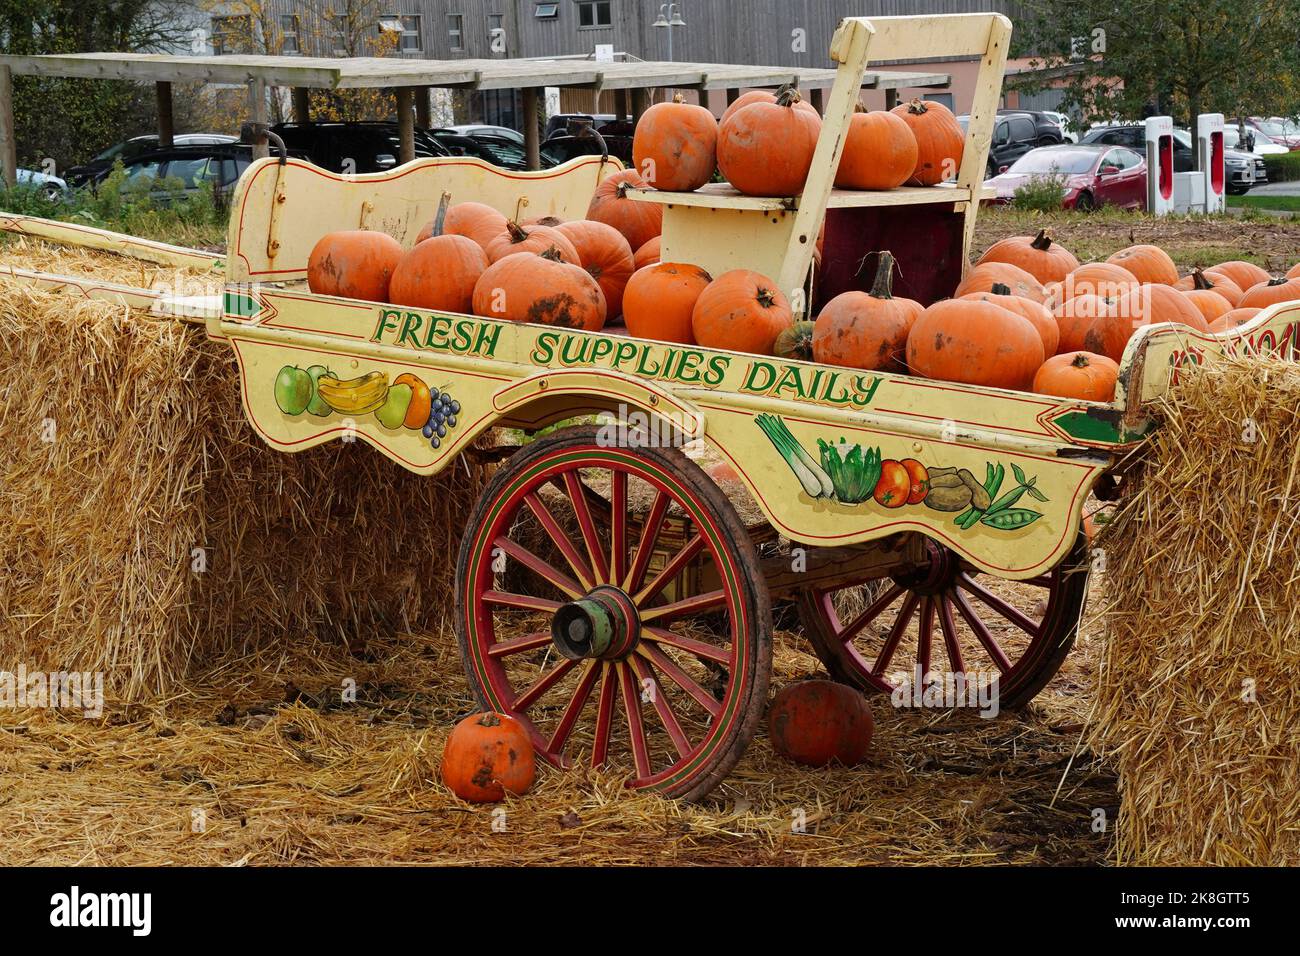 Exeter, UK - October 2022: Halloween pumpkin (gourd) for sale at a pumpkin patch farm in England, UK Stock Photo